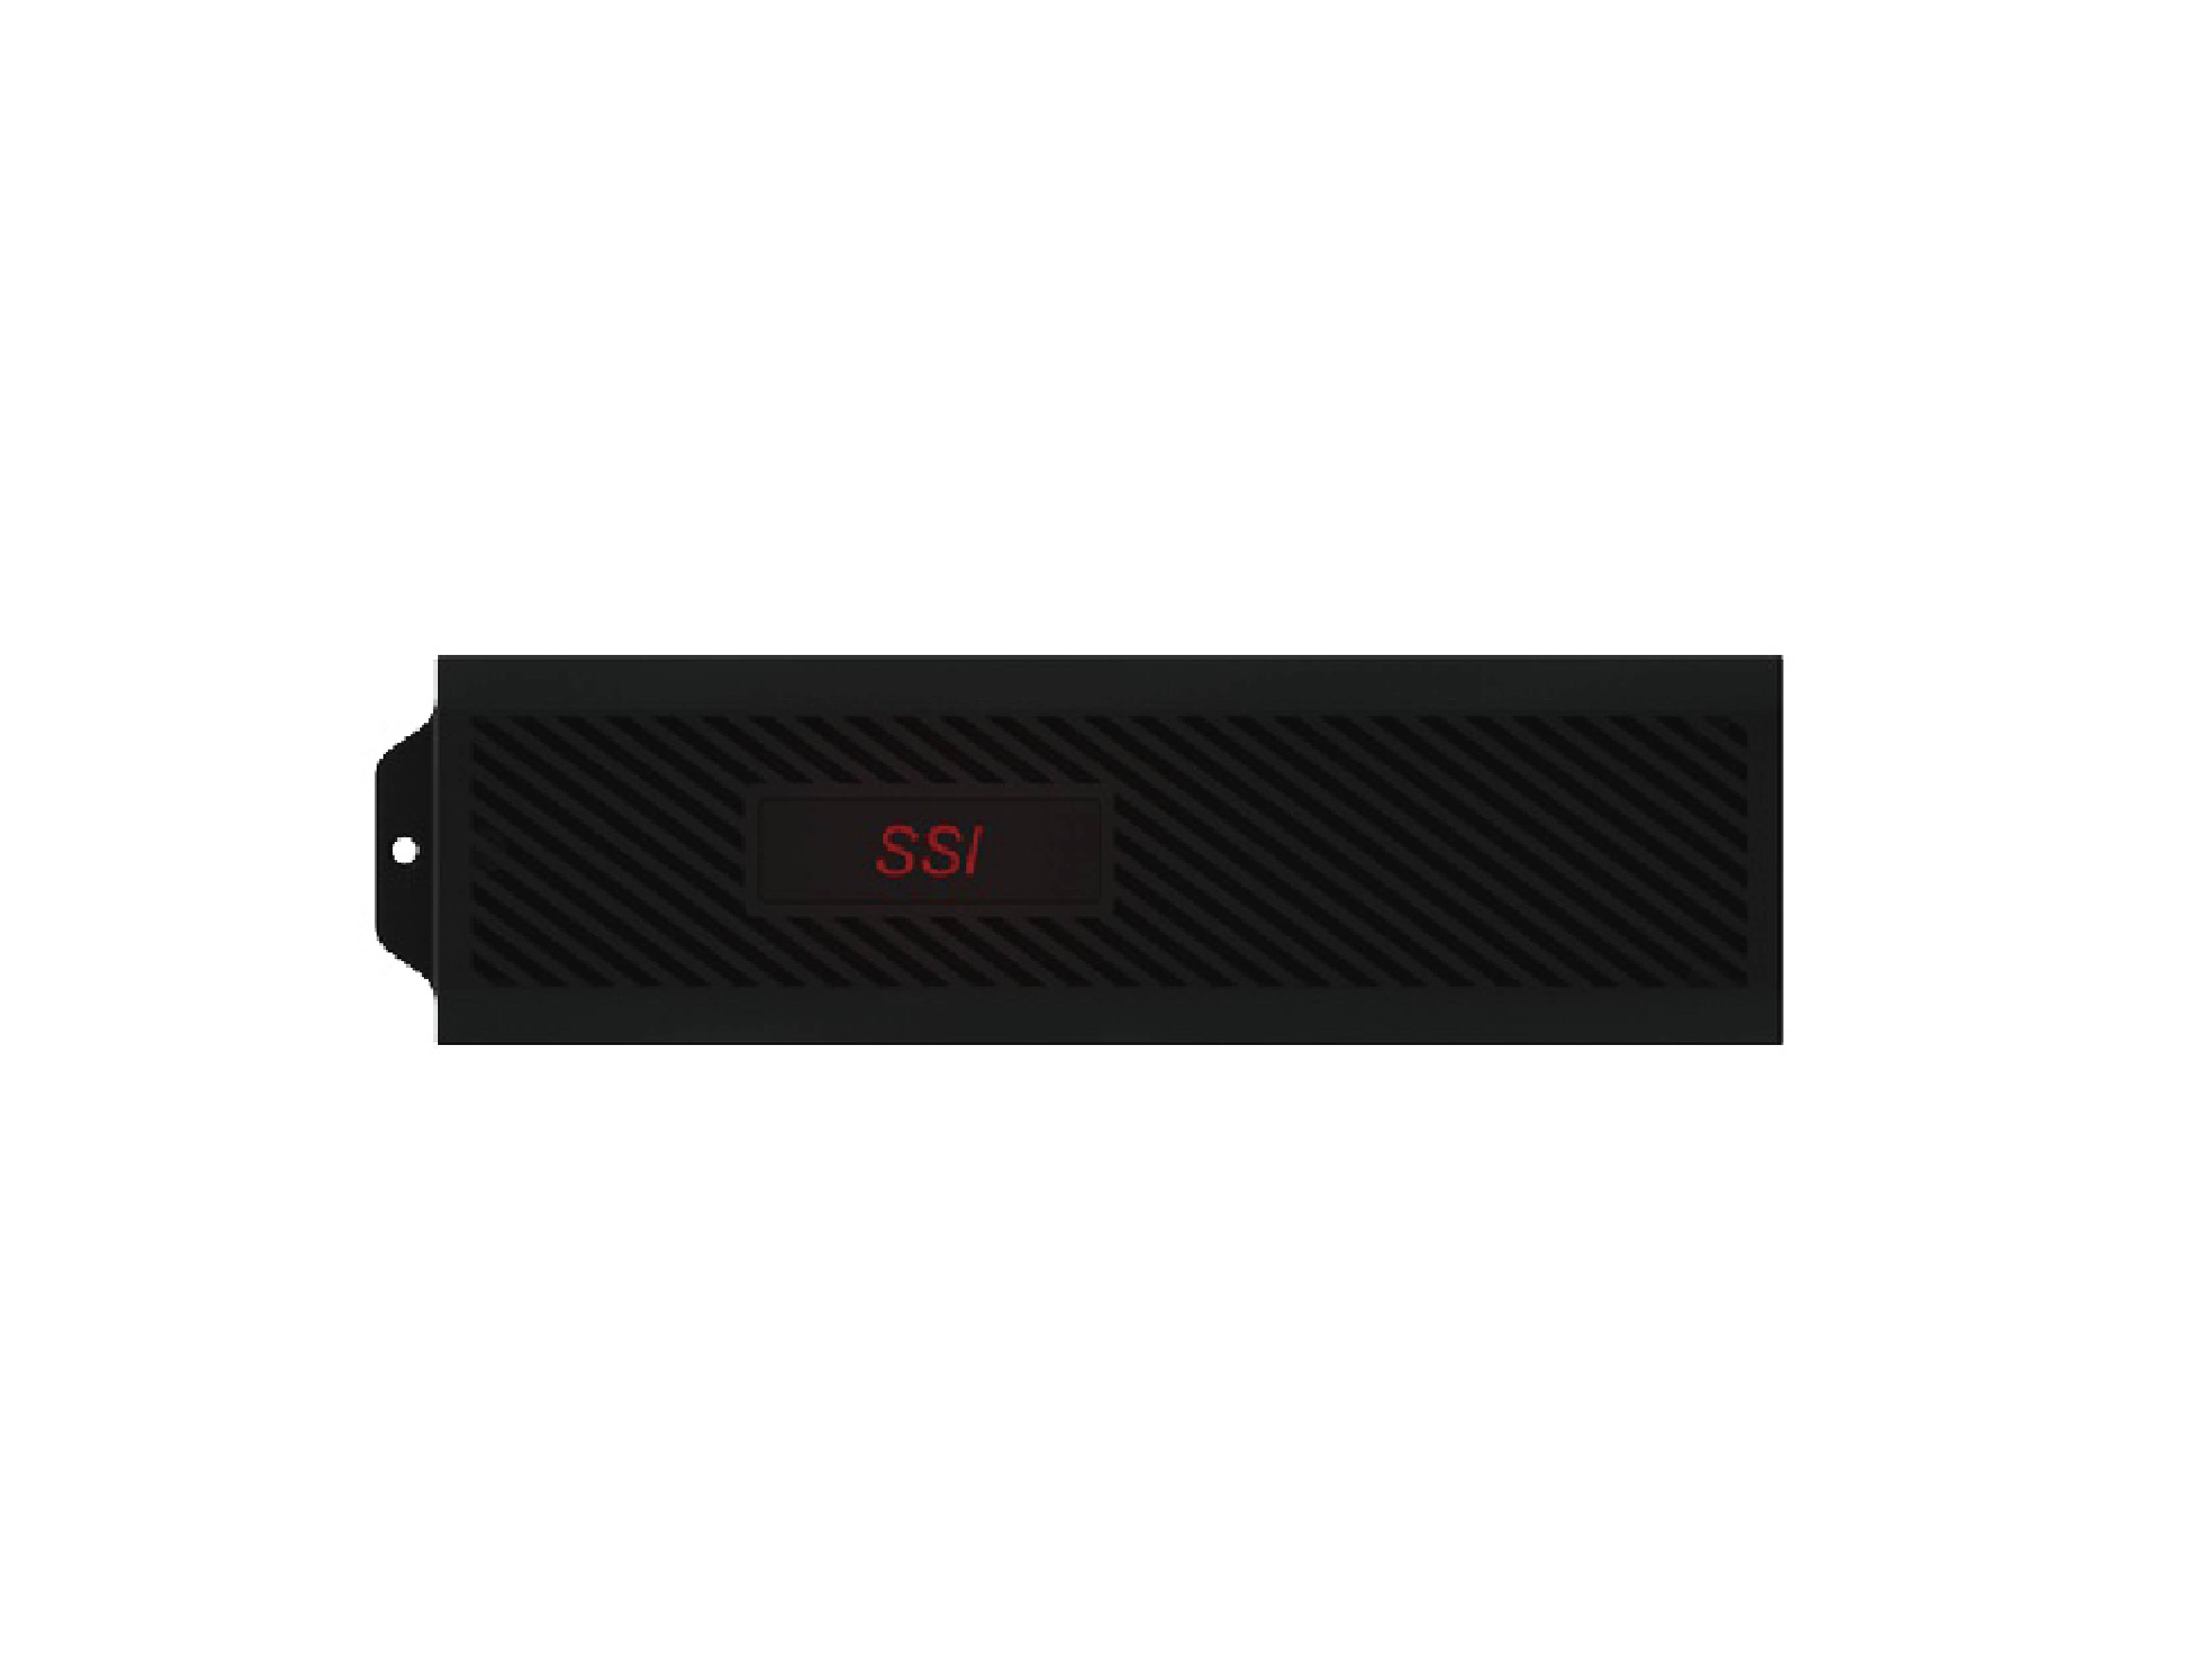 M.2 NVMe/SATA SSD Enclosure (SI-8107US31C), compatible with 1x M.2 NVMe PCIe SSD, USB3.2 -C 10Gbps to host.